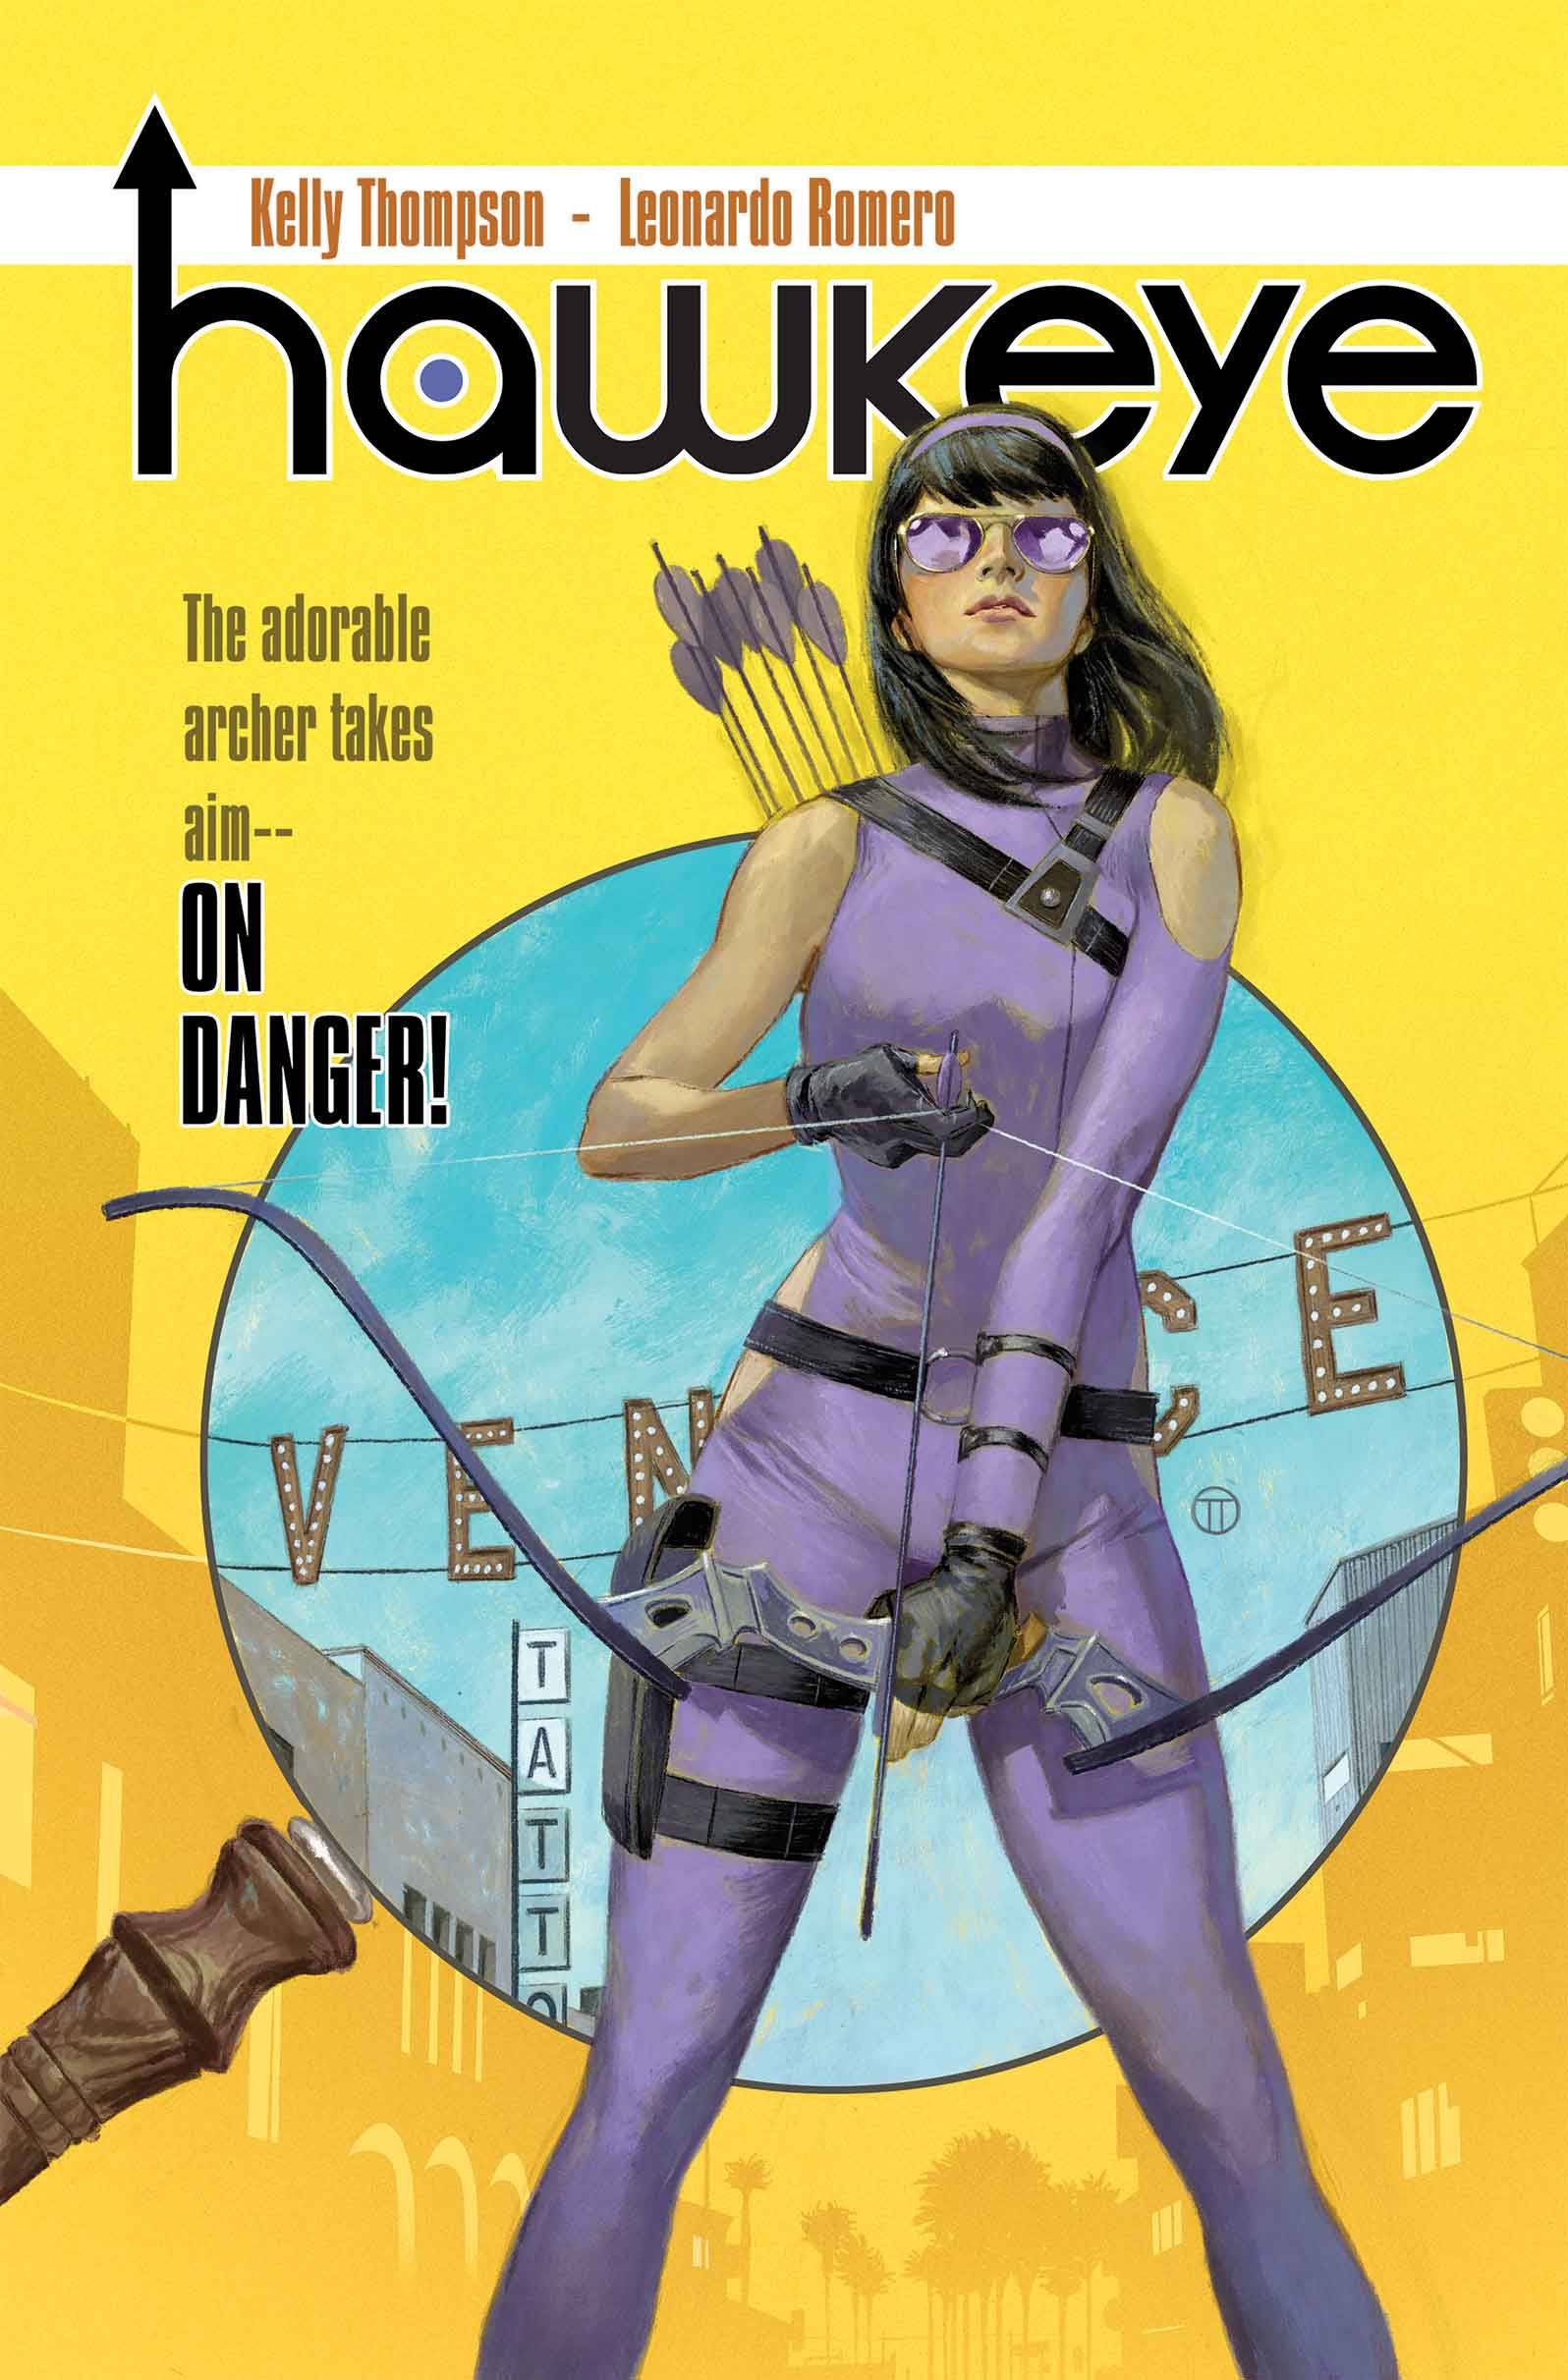 HAWKEYE BY TEDESCO POSTER